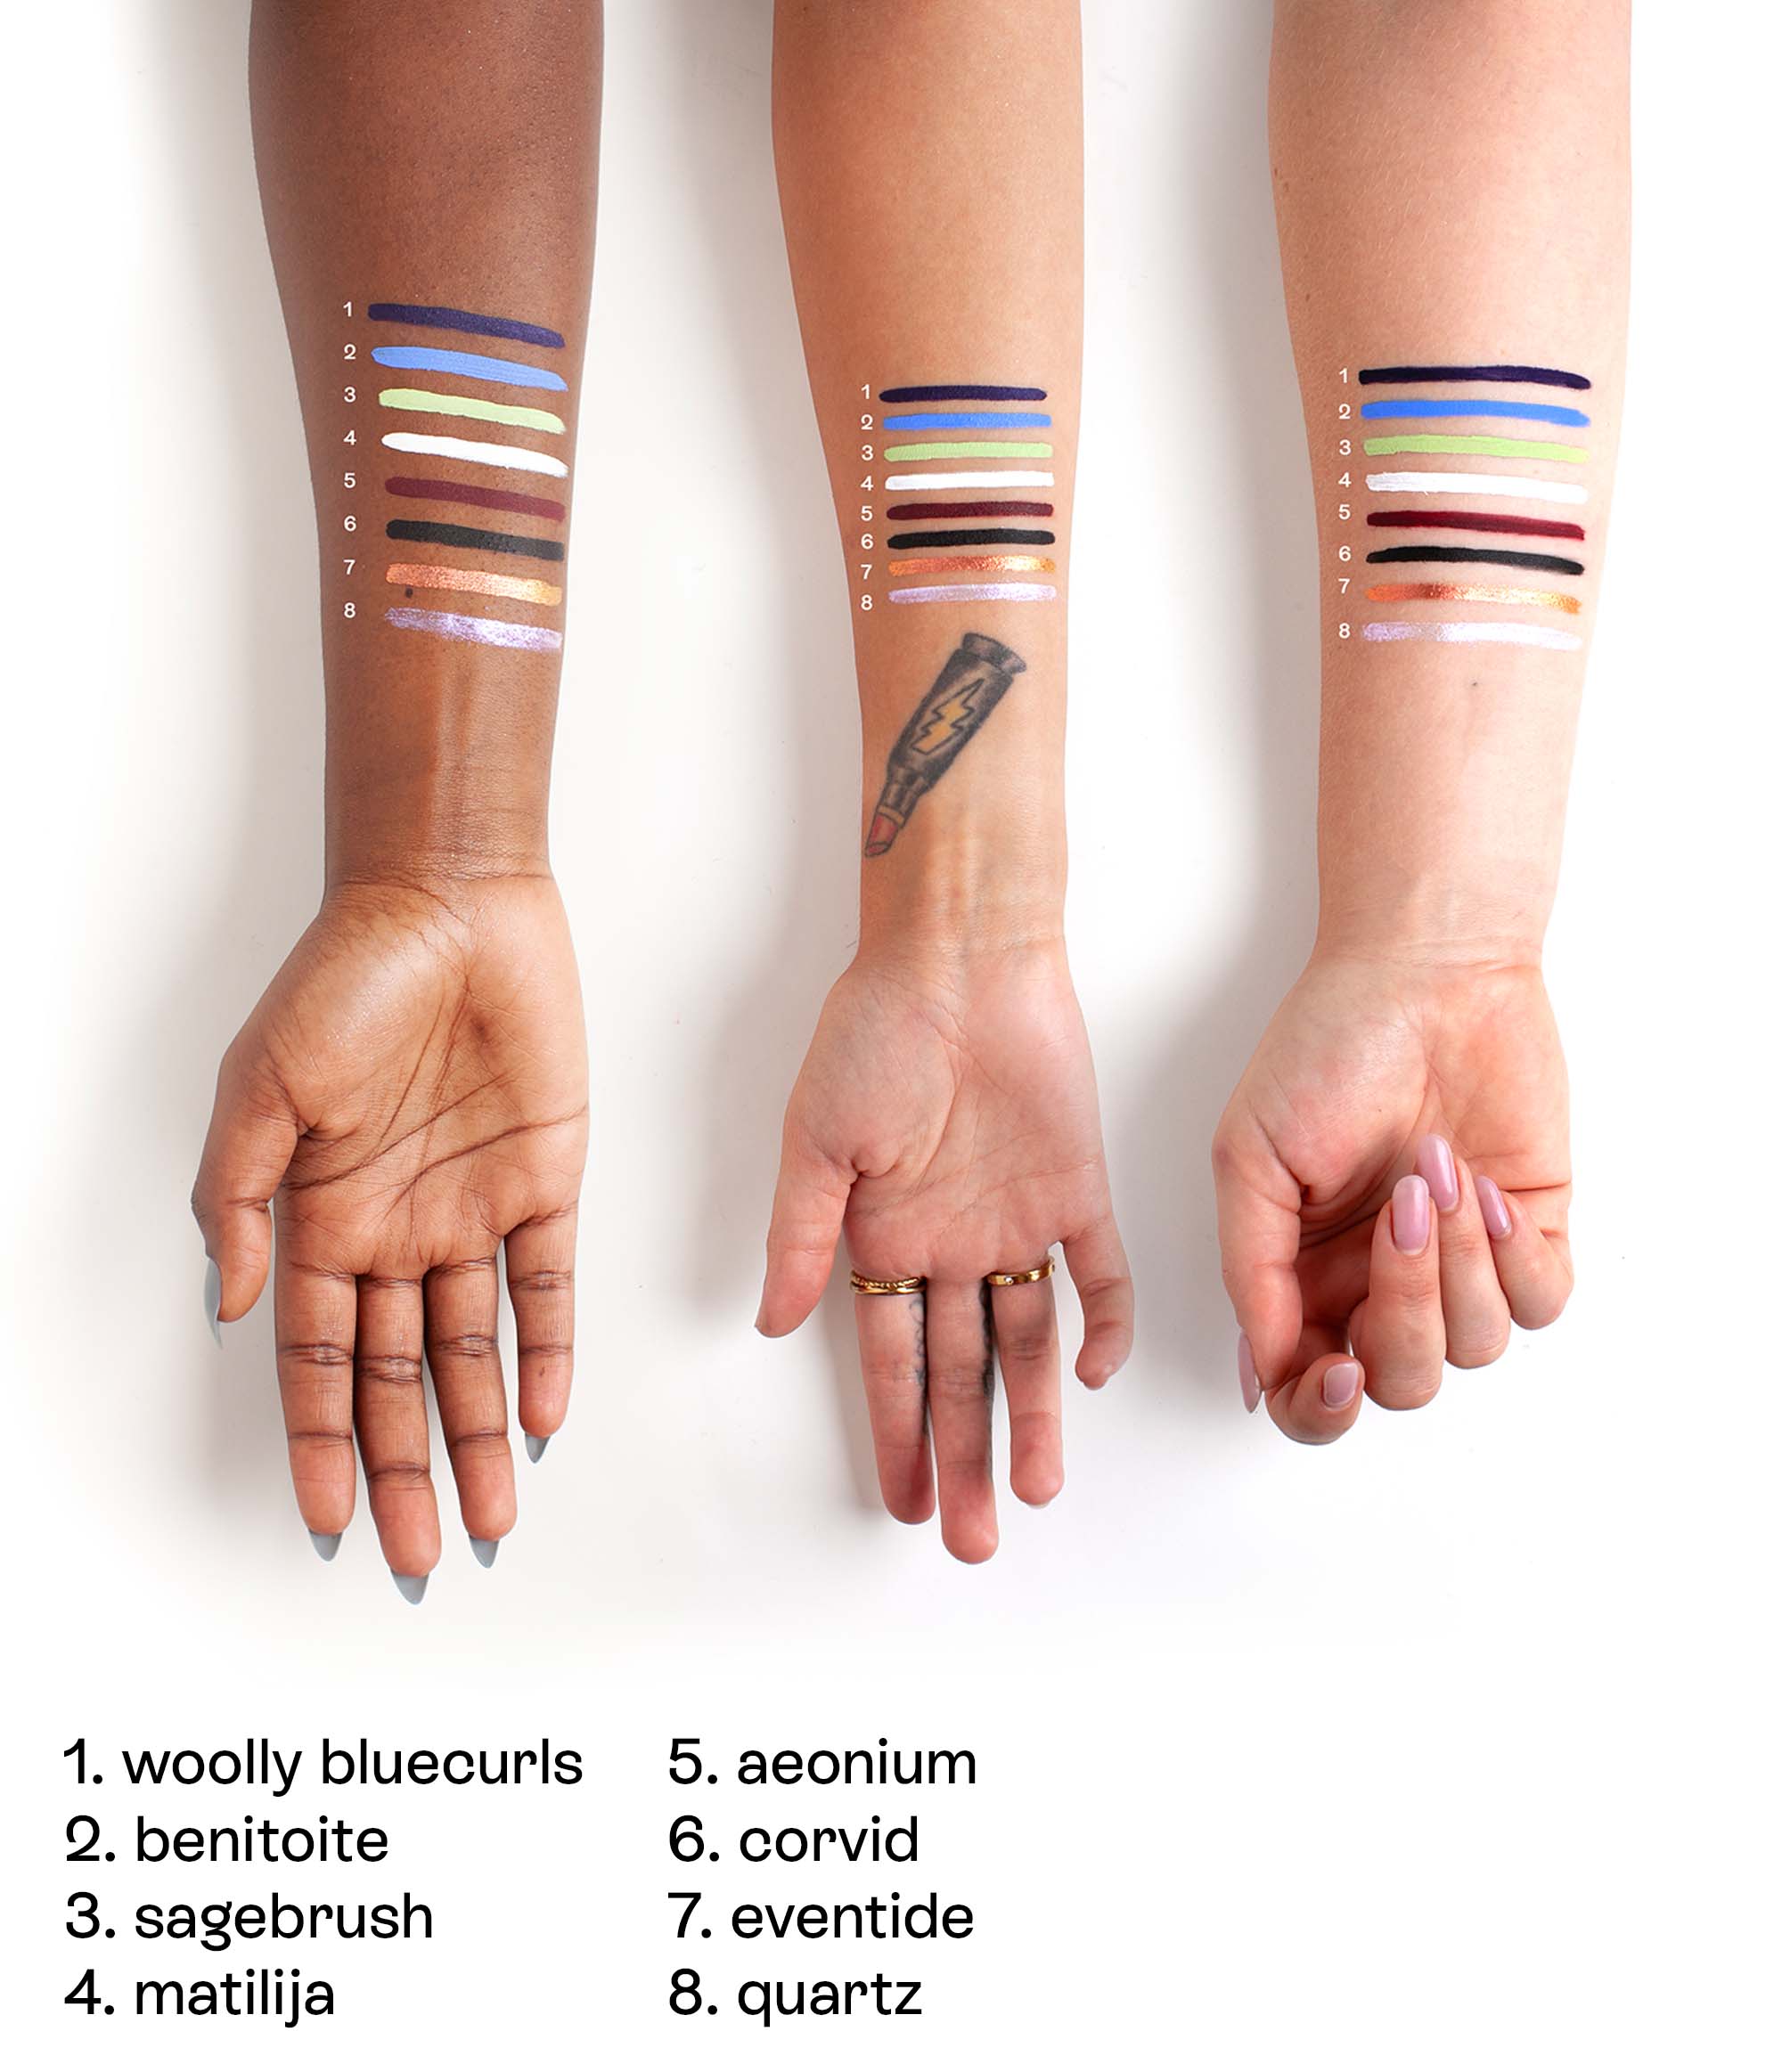 Three forearms of different skintones, with palms facing up on a white background. On each arm their are 8 colorful stripes, one for each deepdive product.